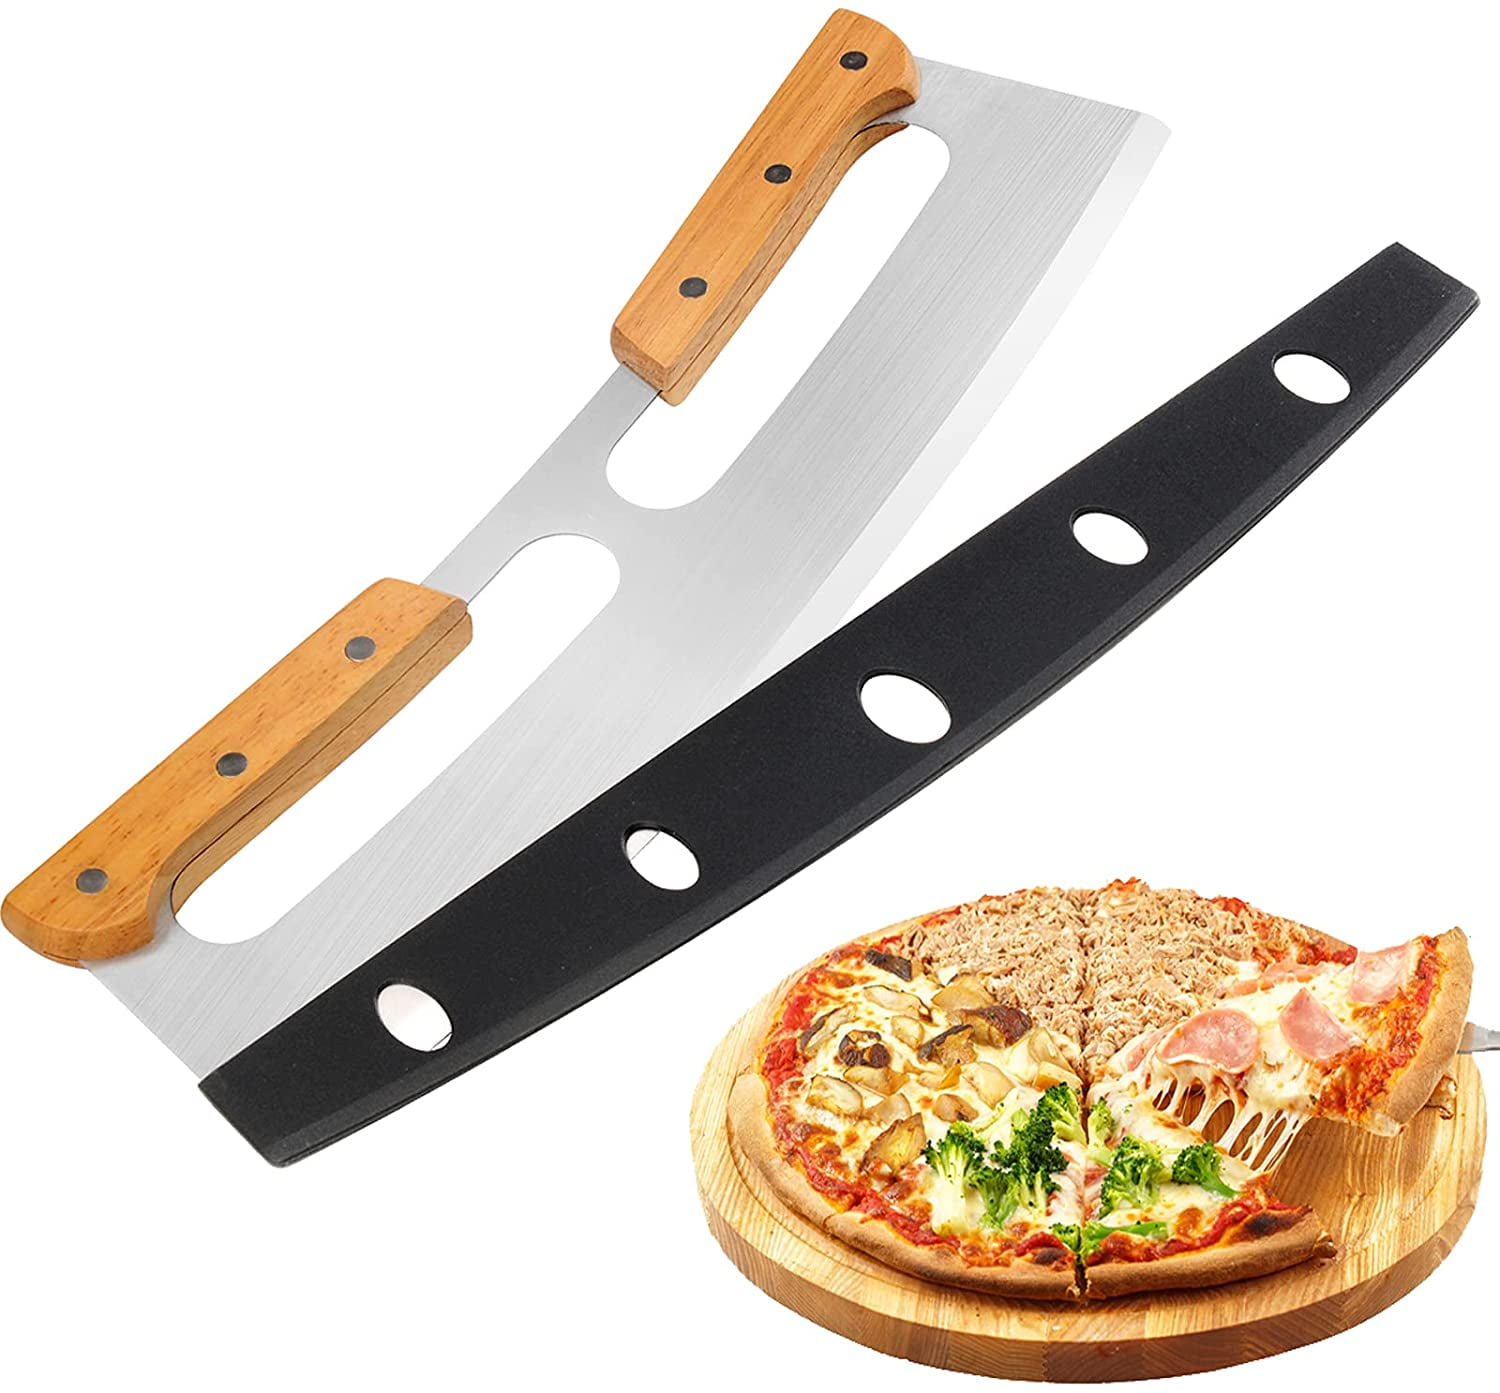  Dreamfarm Scizza, Non-Stick Pizza Scissors with Protective  Server, Stainless Steel All-In-One Pizza Slicer & Pizza Server, Easy-To-Use & Clean Pizza Cutters